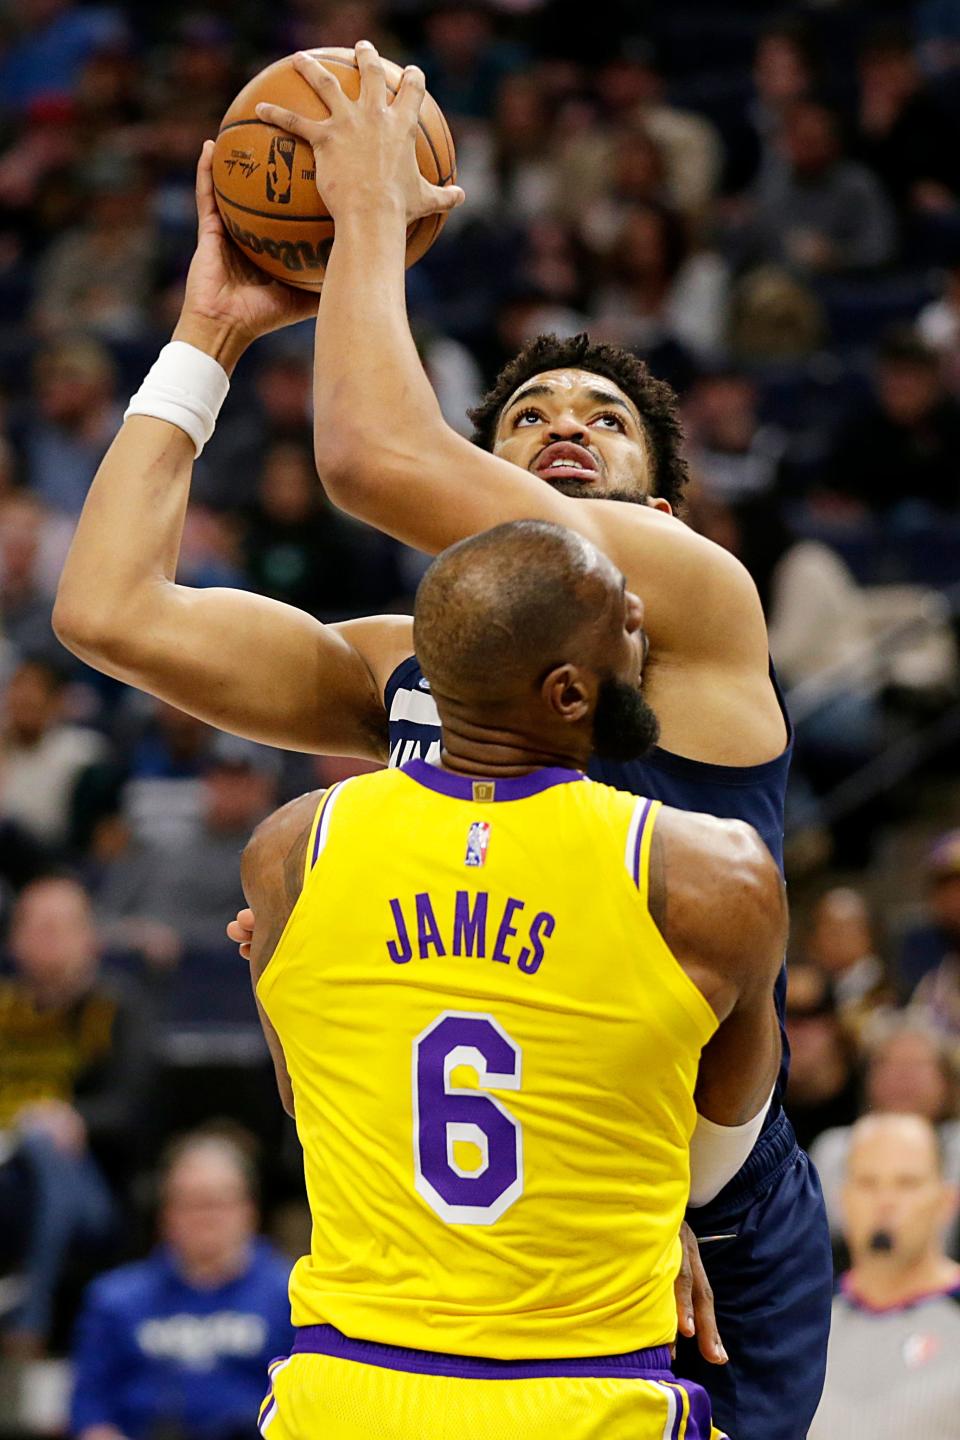 Will the Timberwolves or Lakers win their NBA Play-In Tournament game?